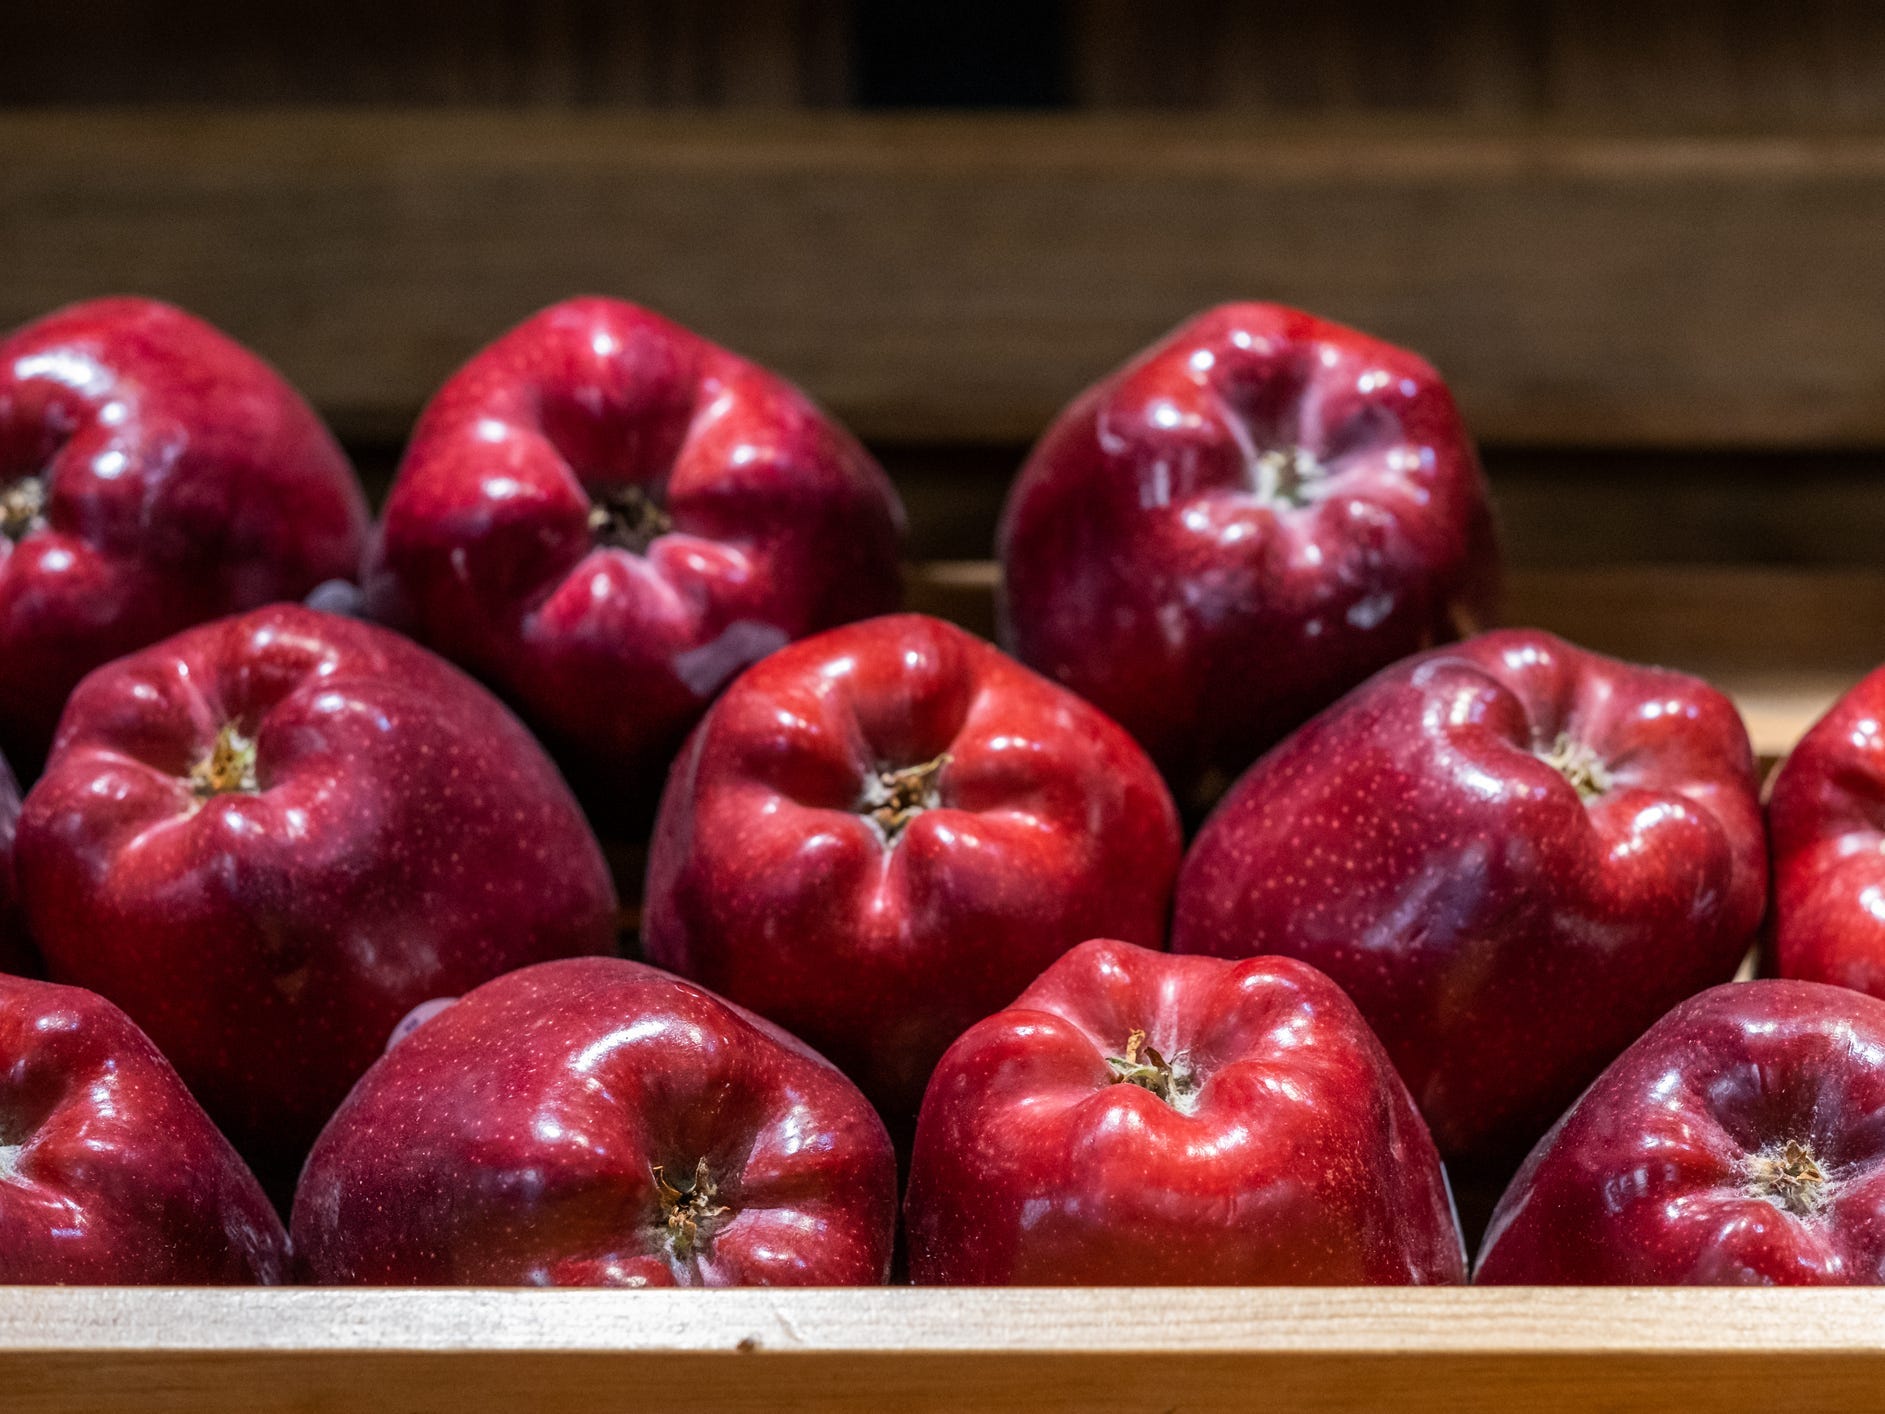 Some Red Delicious apples in a crate.